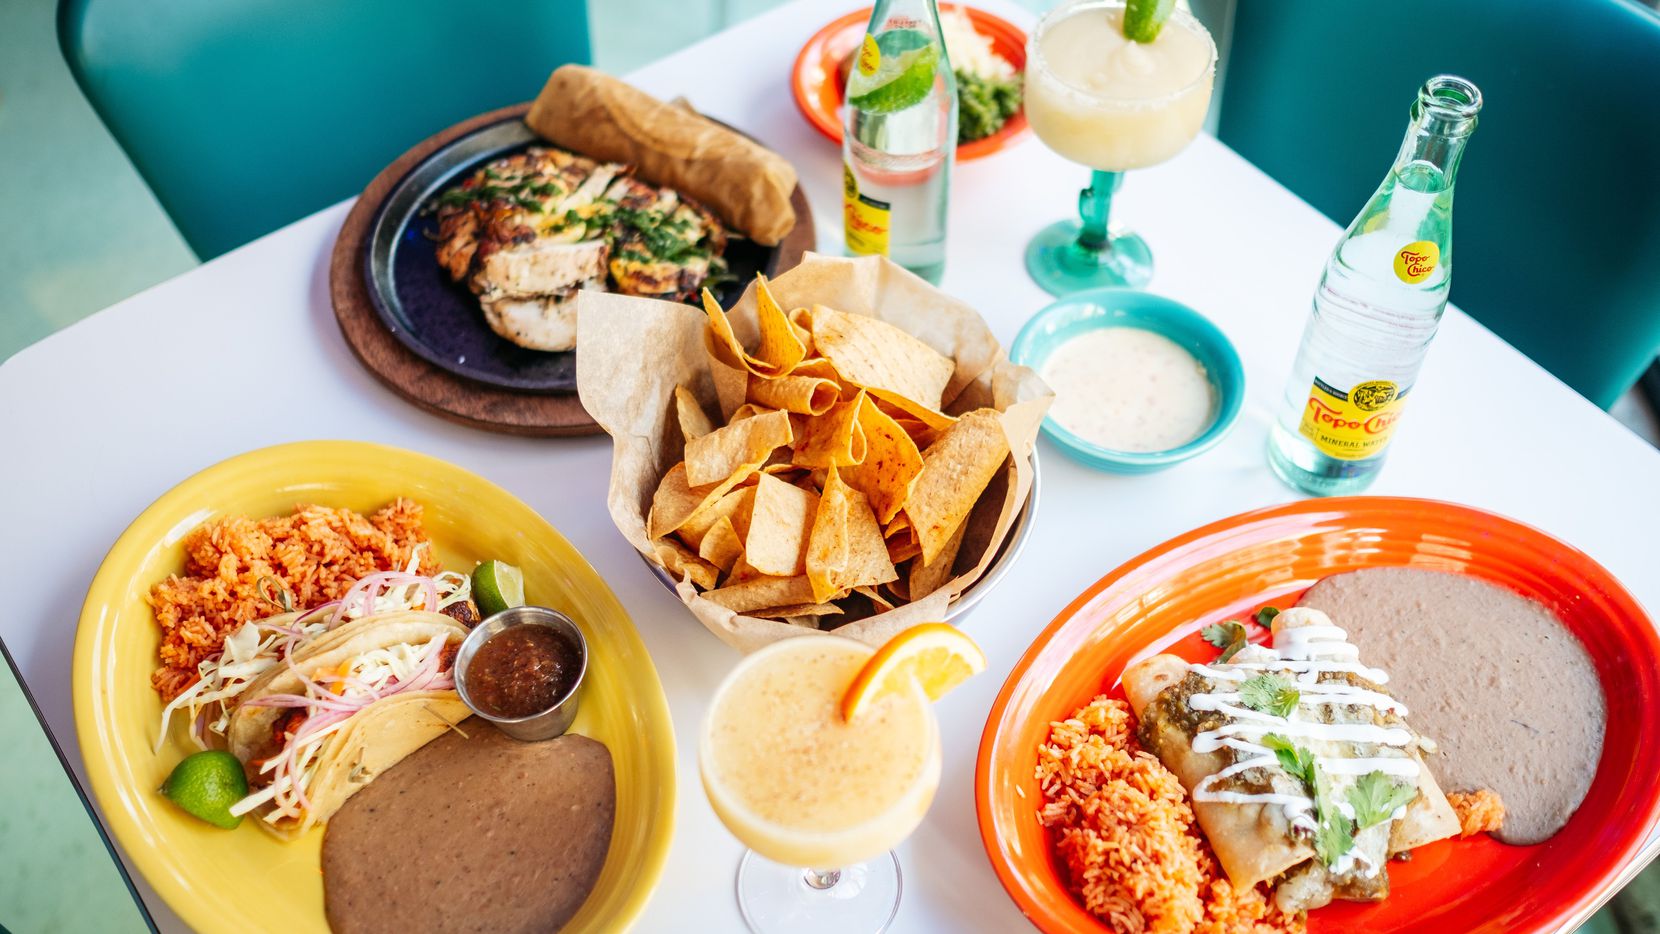 Part of Queso Beso's menu will be available to diners starting Aug. 21, 2020.